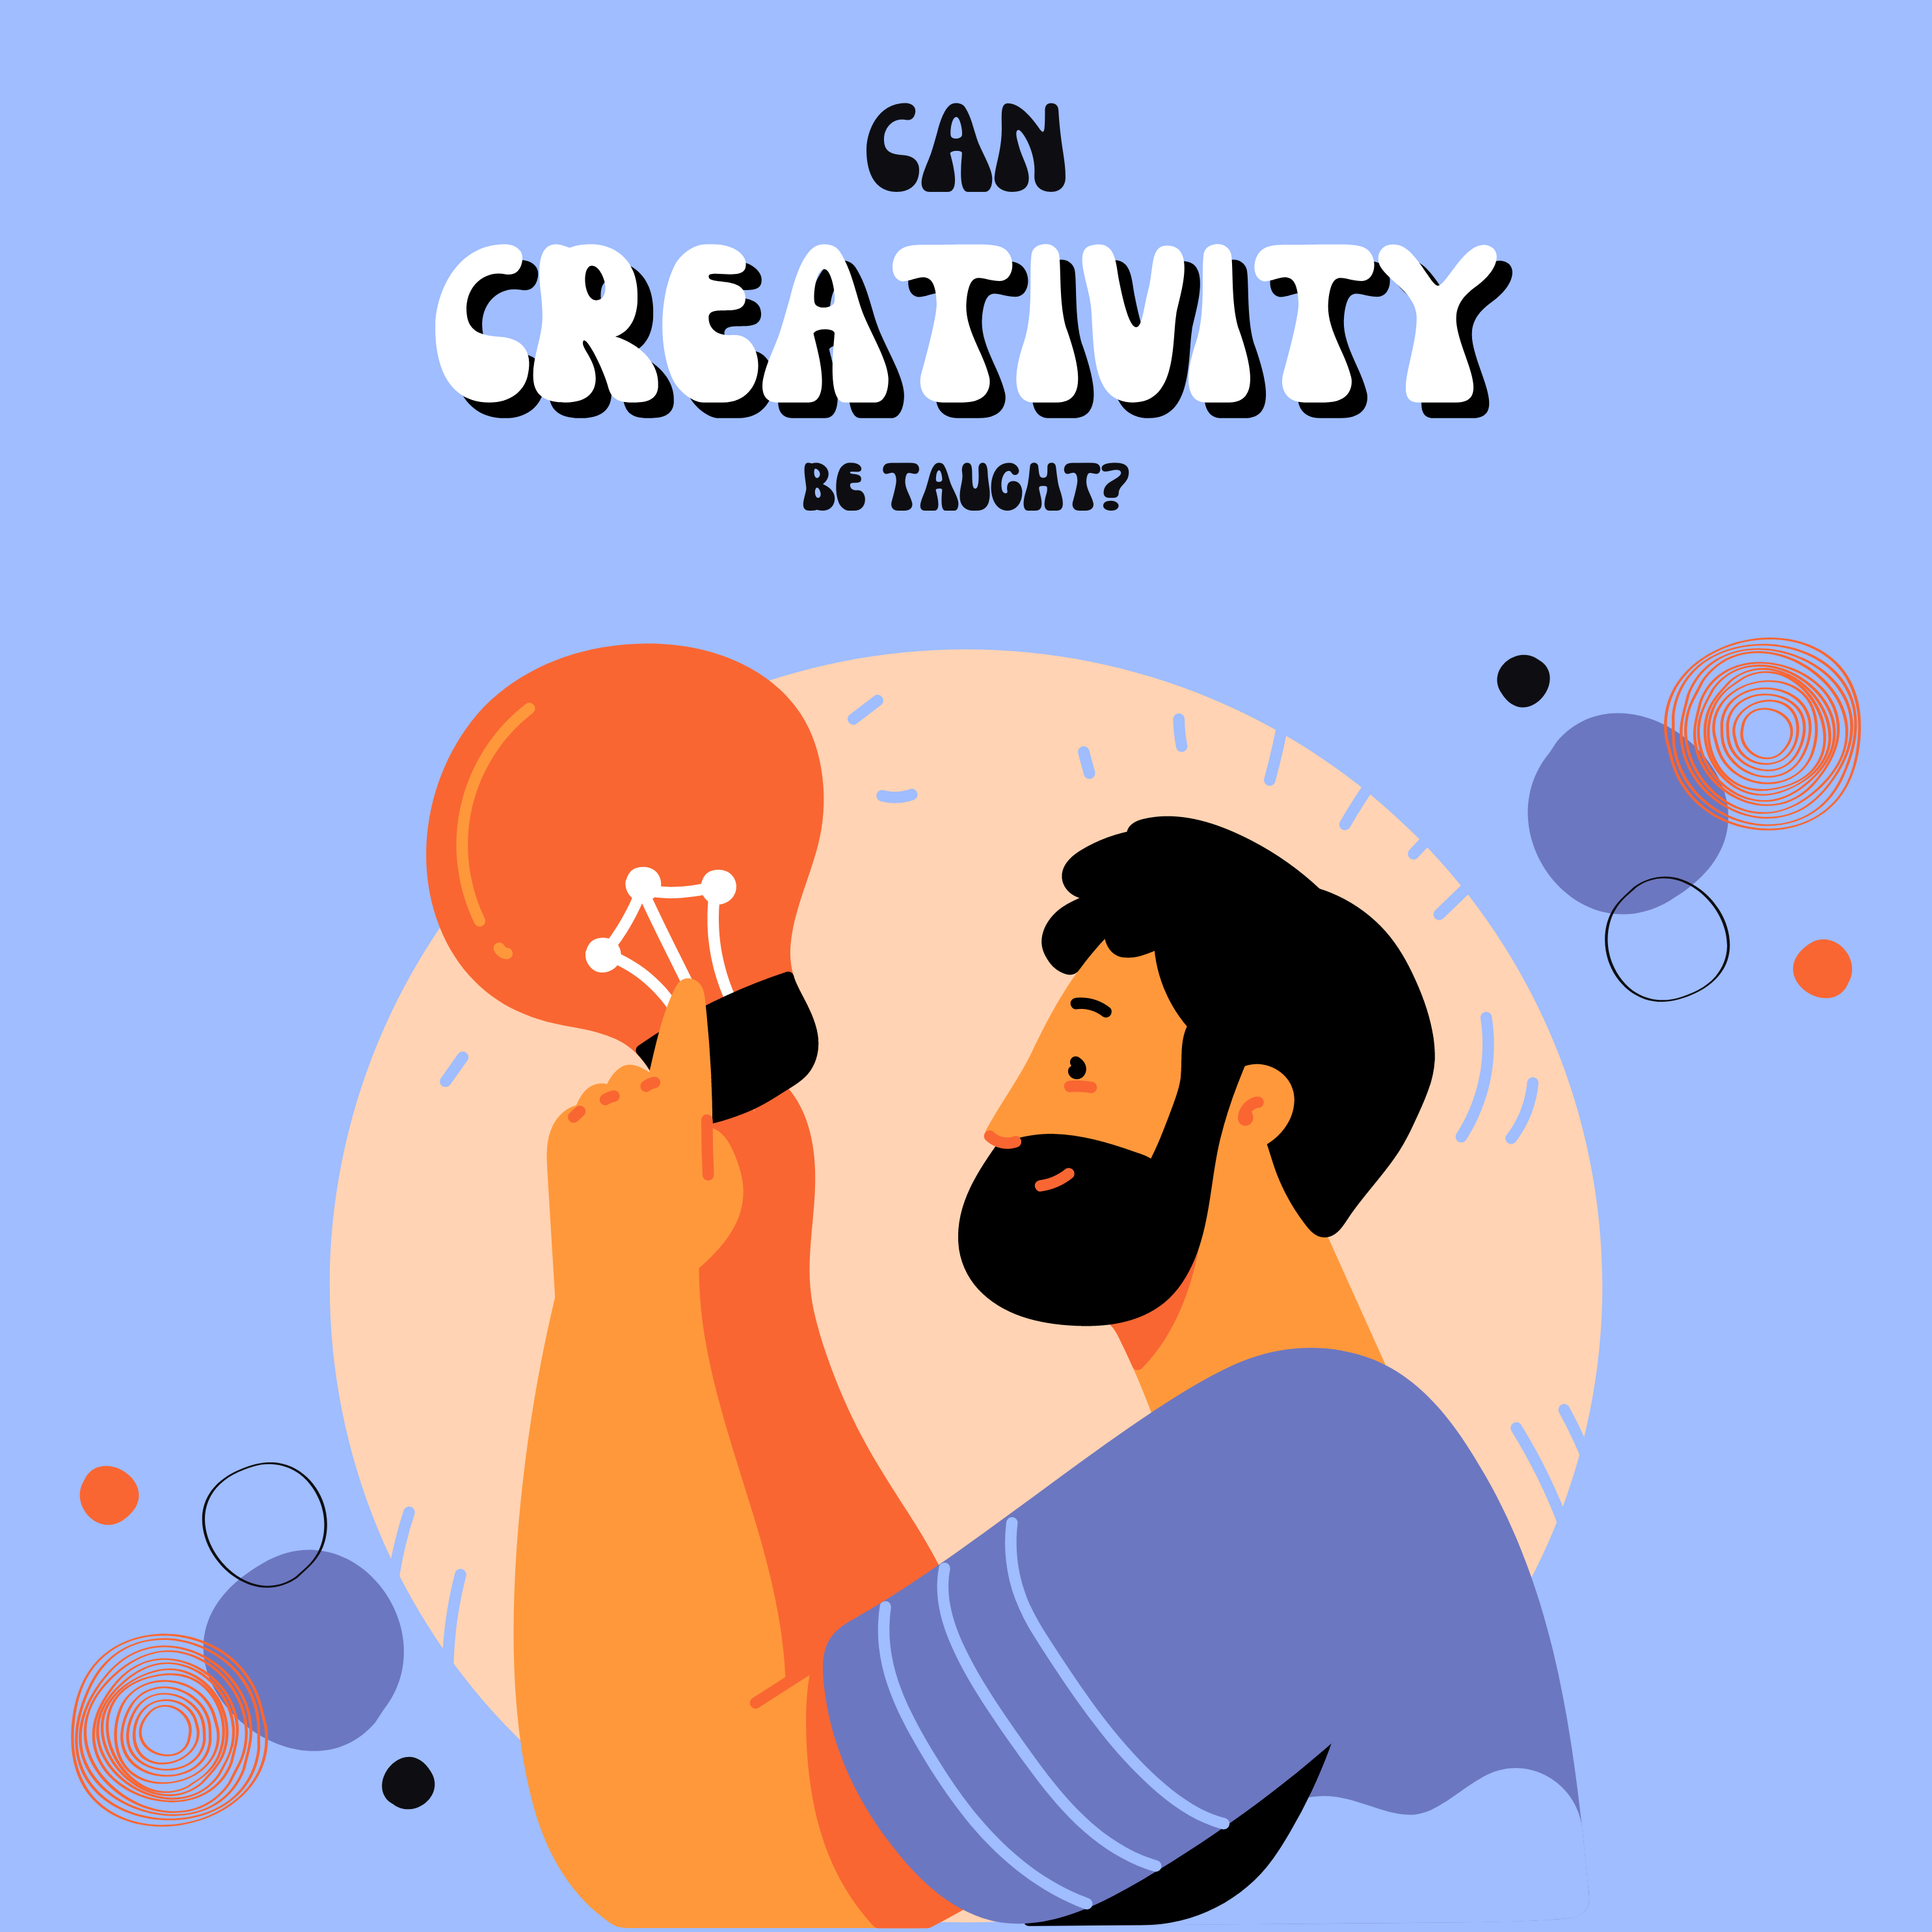 CAN CREATIVITY BE TAUGHT?